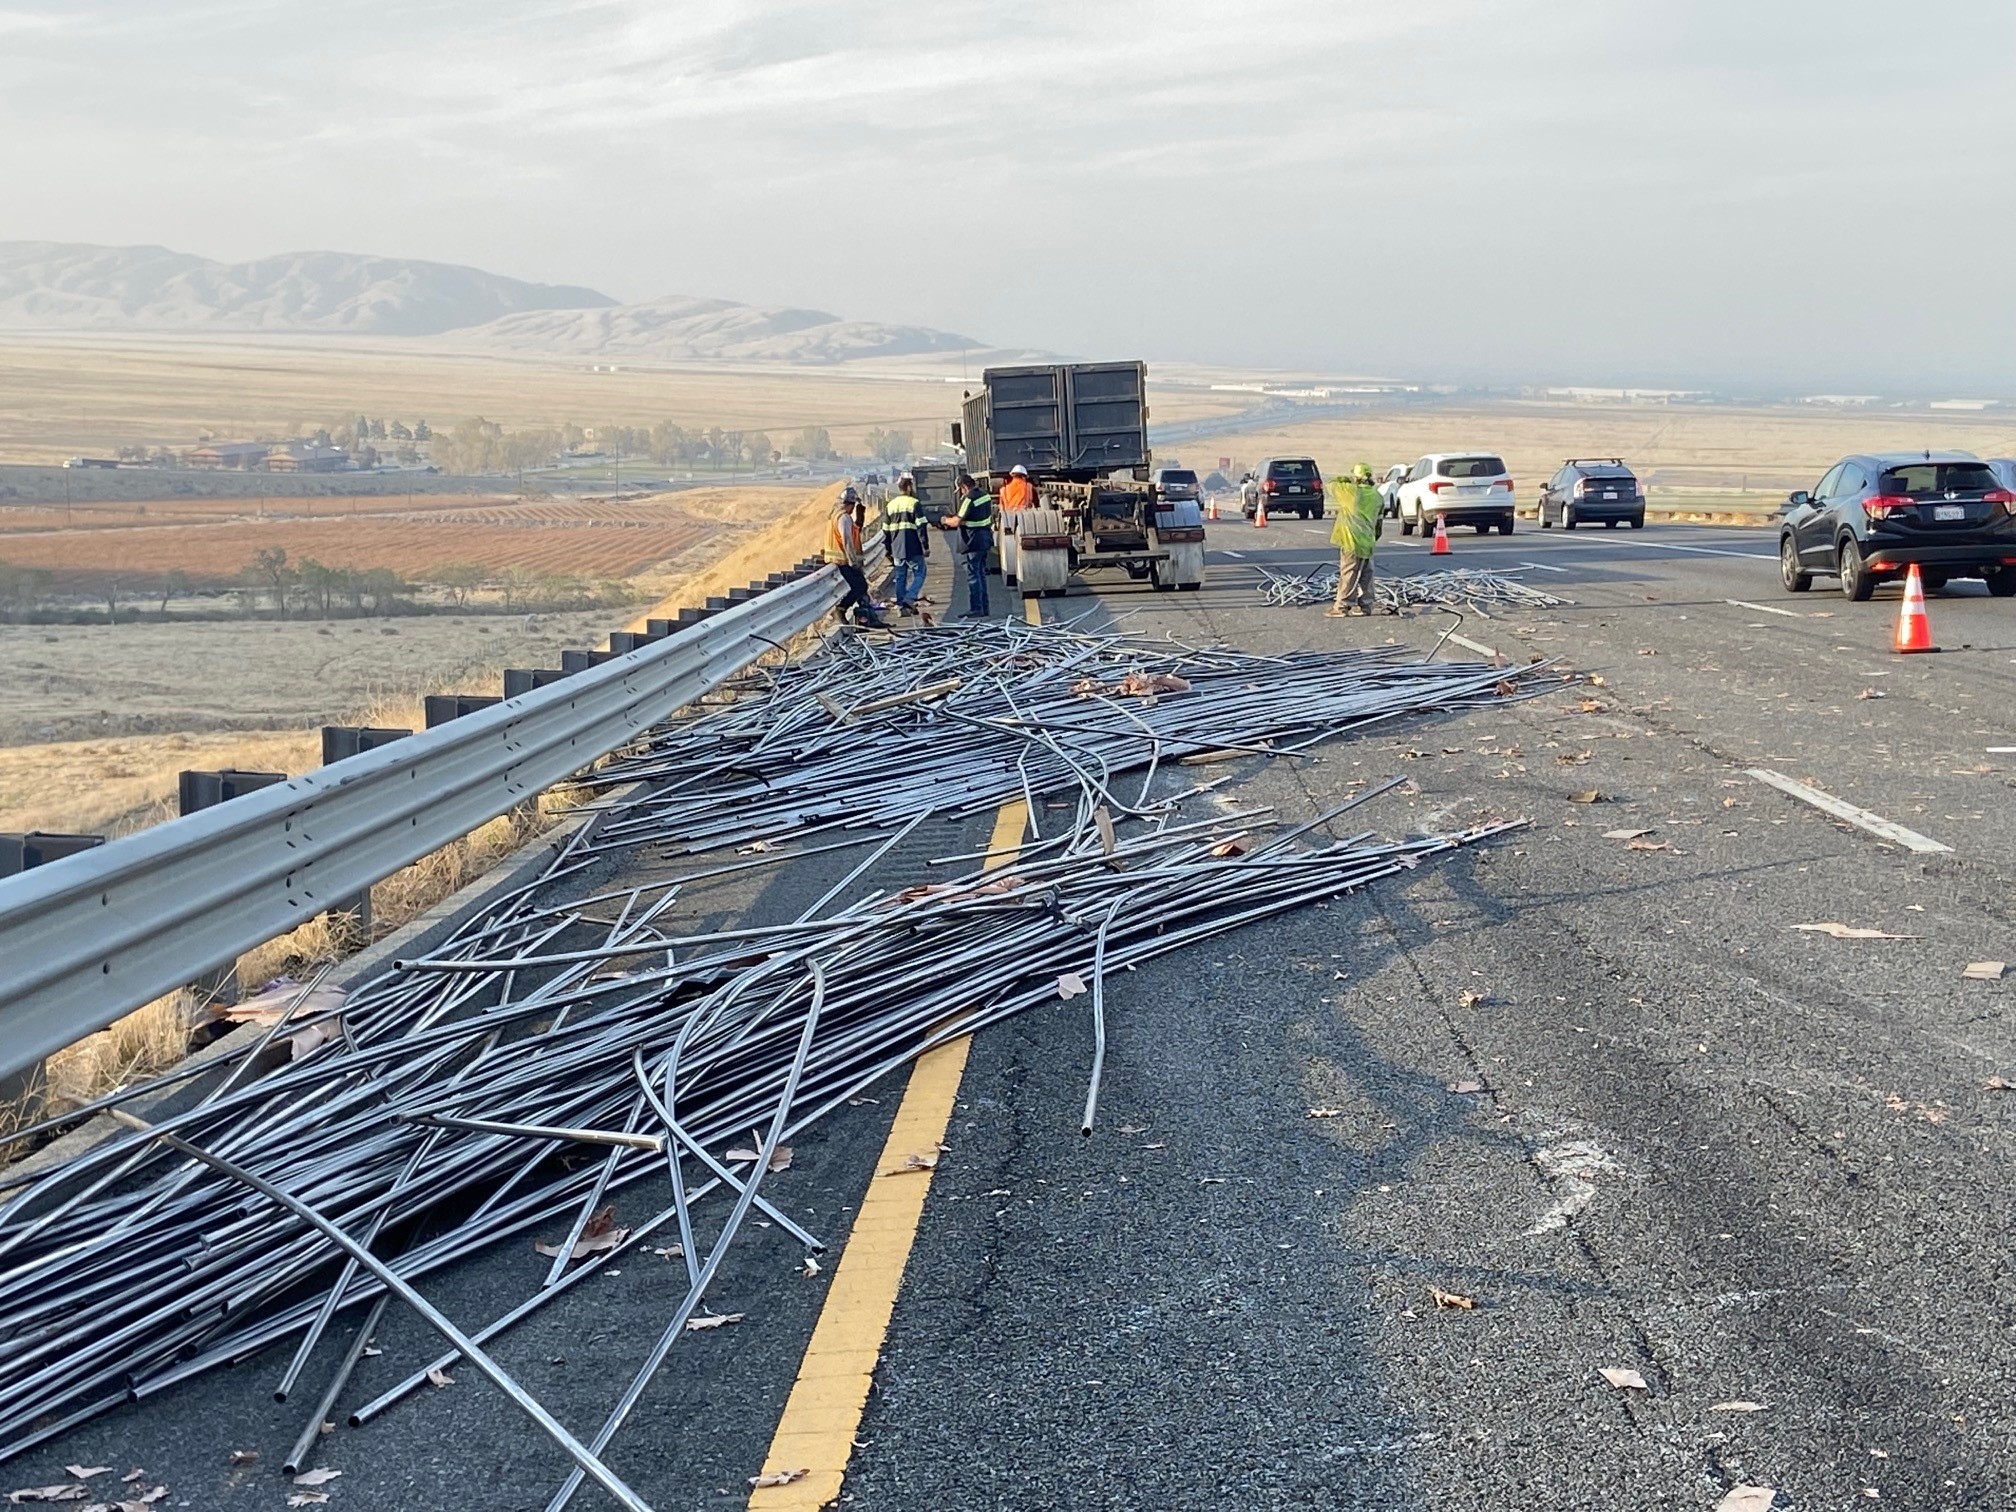 Metal poles spilled on a freeway shoulder with a big-rig parked in the distance.